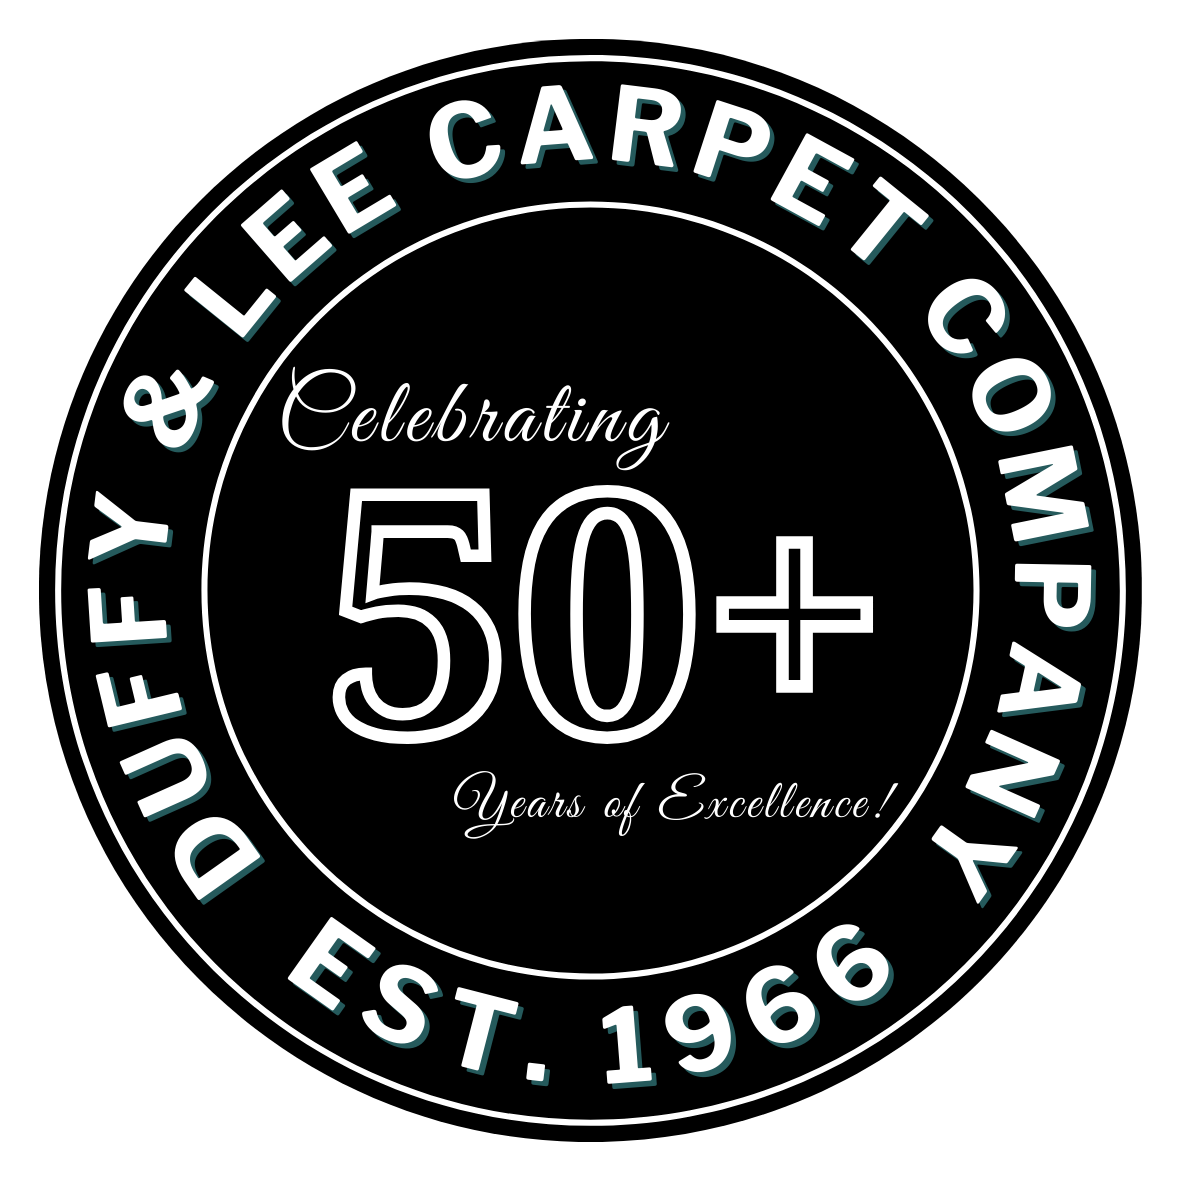 Contact The Duffy Lee Carpet Company